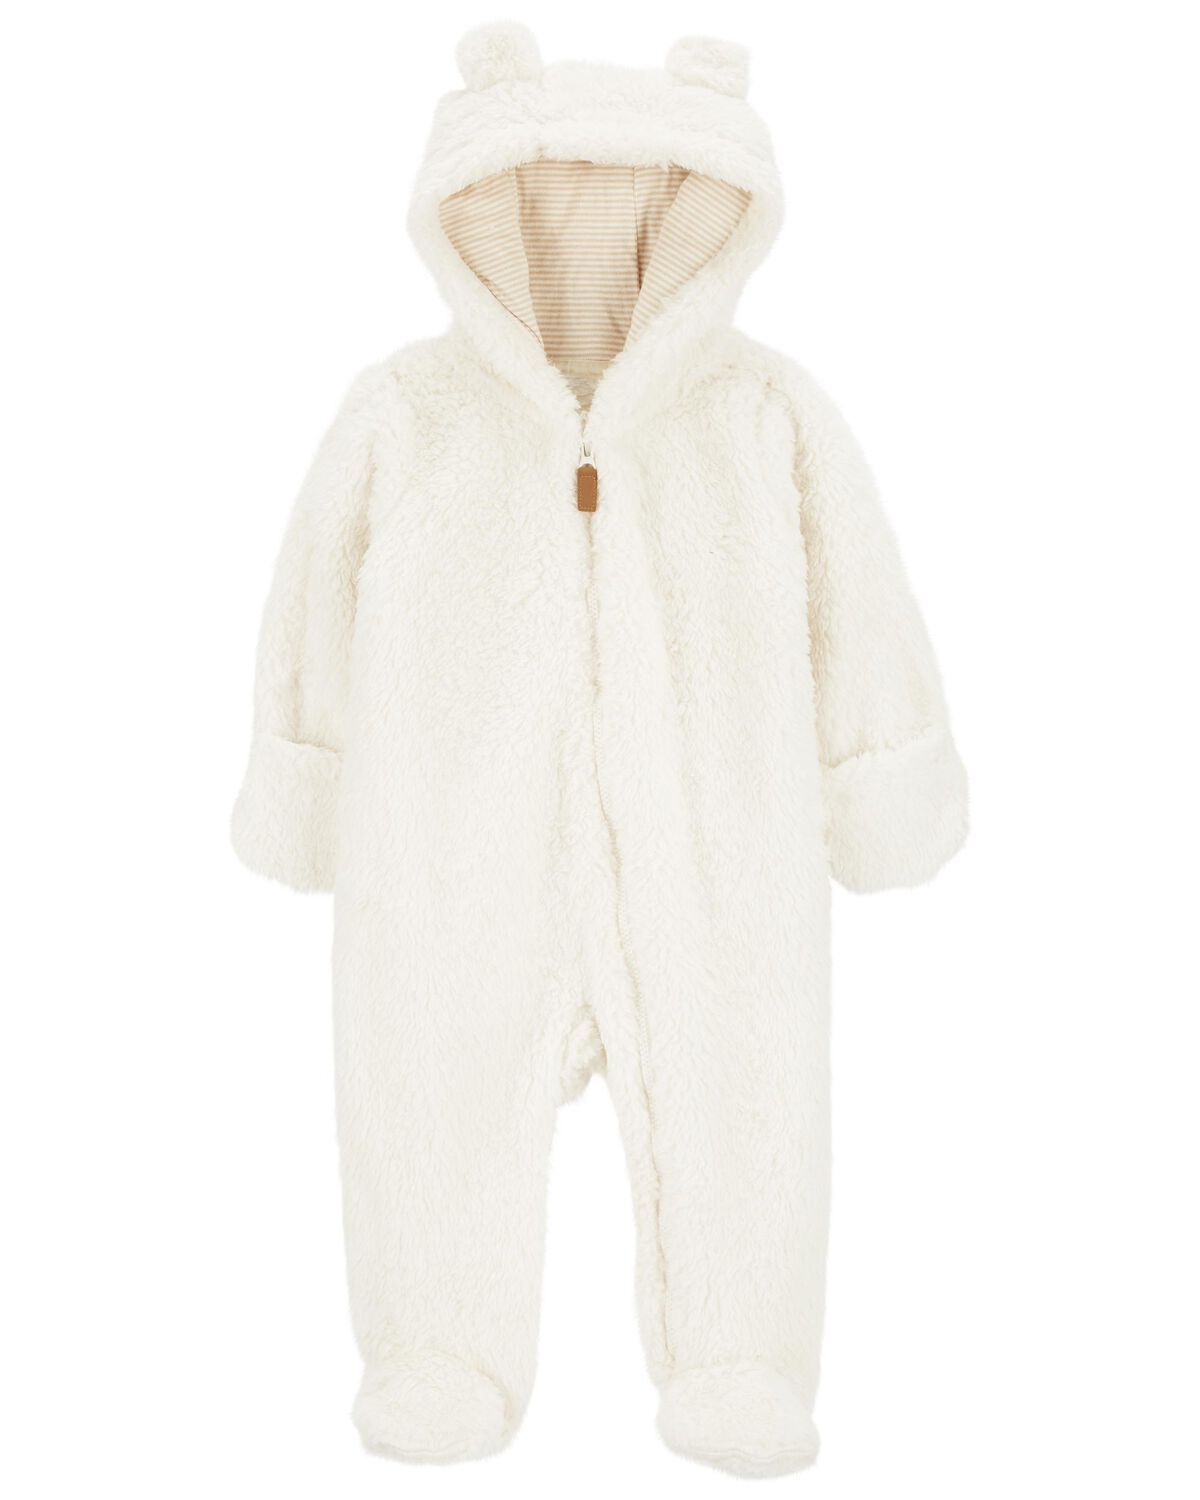 Ivory Baby Hooded Sherpa Jumpsuit | carters.com | Carter's